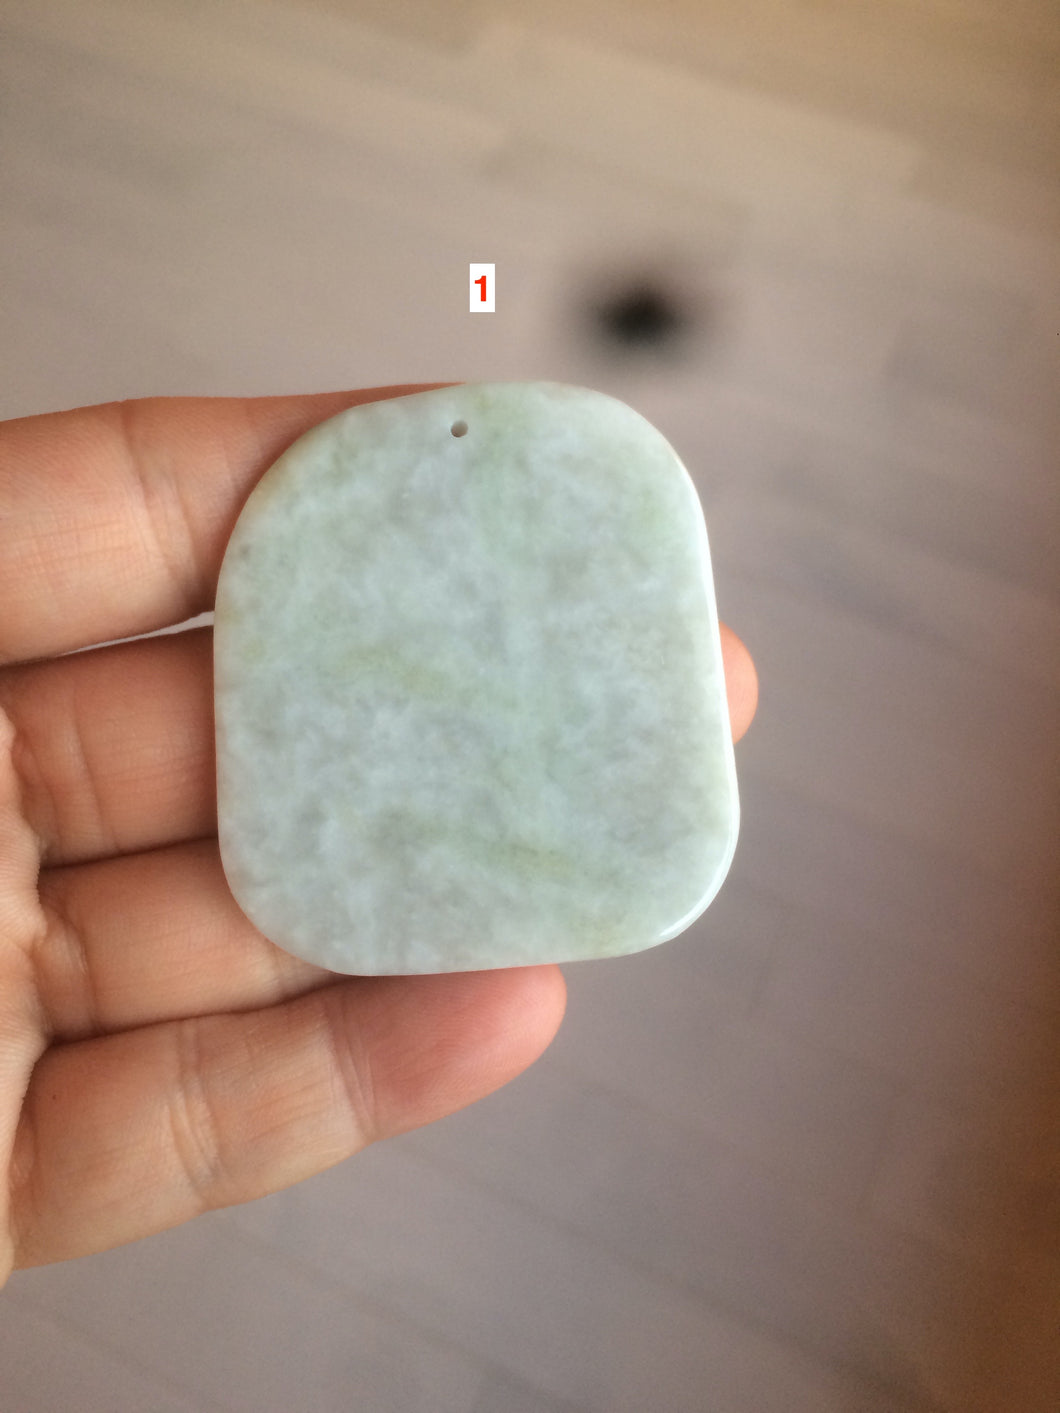 100% Natural icy watery light green/white Jadeite gua sha (刮痧) Jadeite jade AF18 (Add on item! not sale individually)